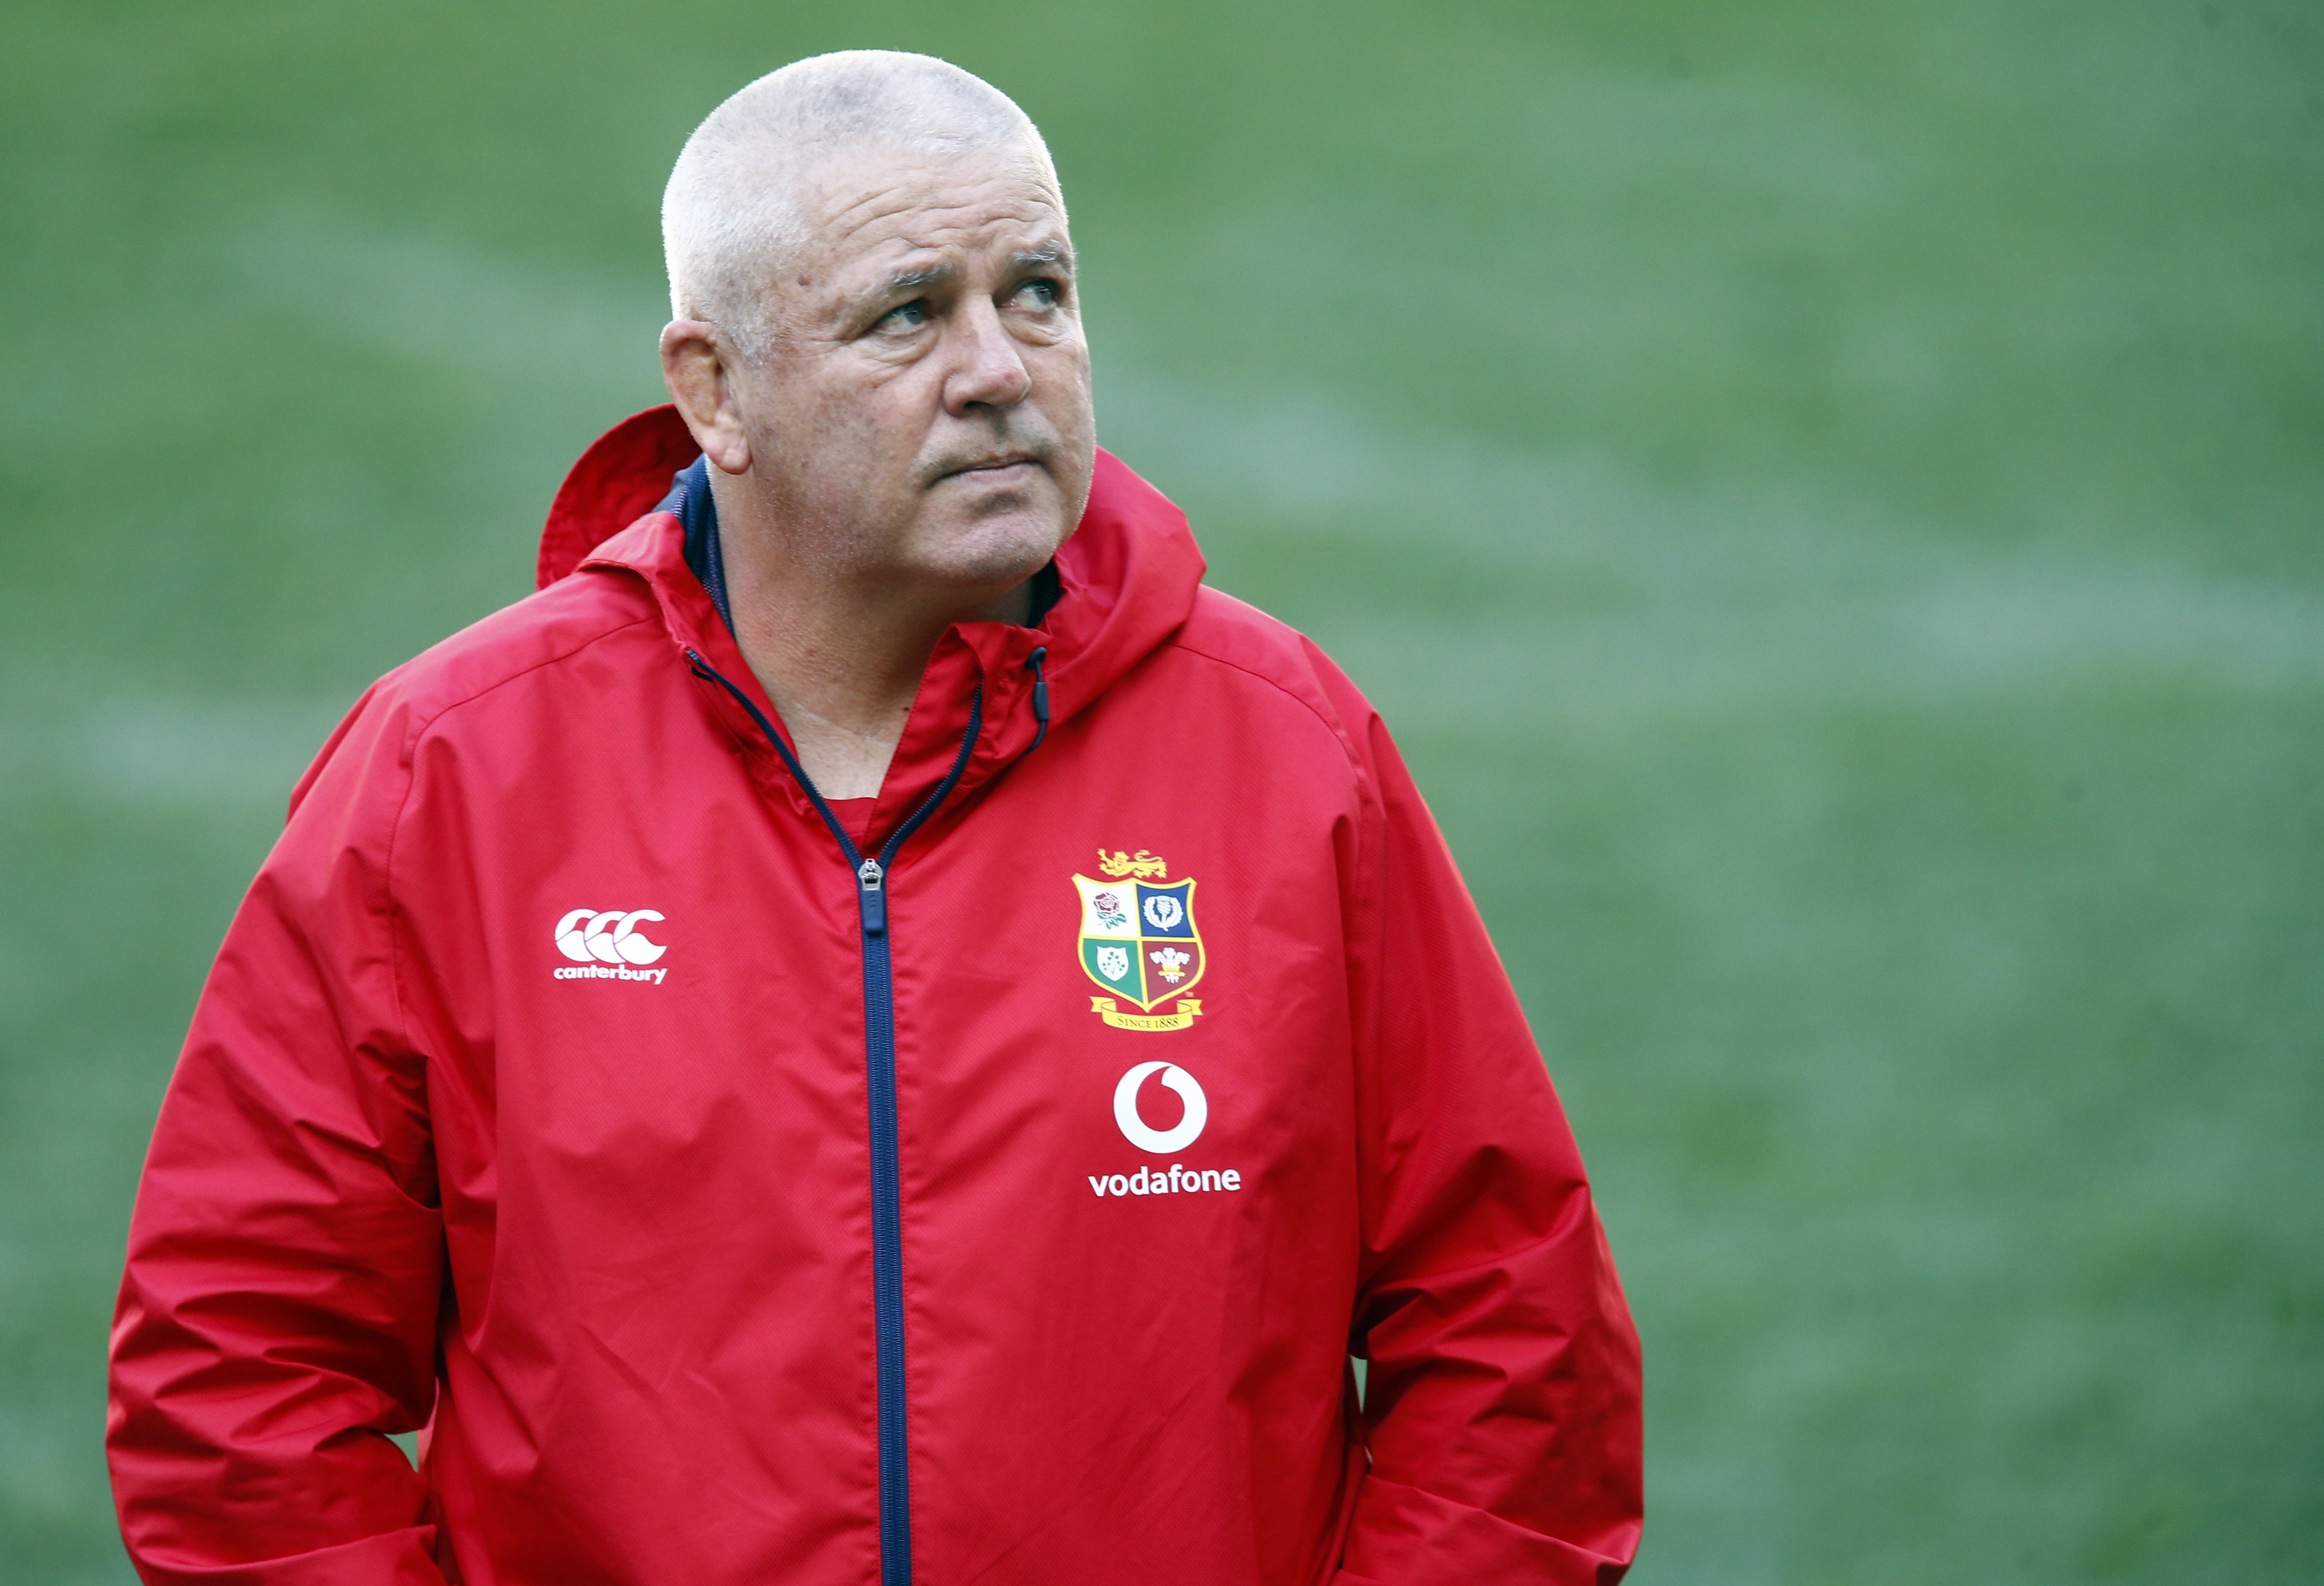 Warren Gatland has not ruled out leading a fourth tour with the British and Irish Lions in 2025